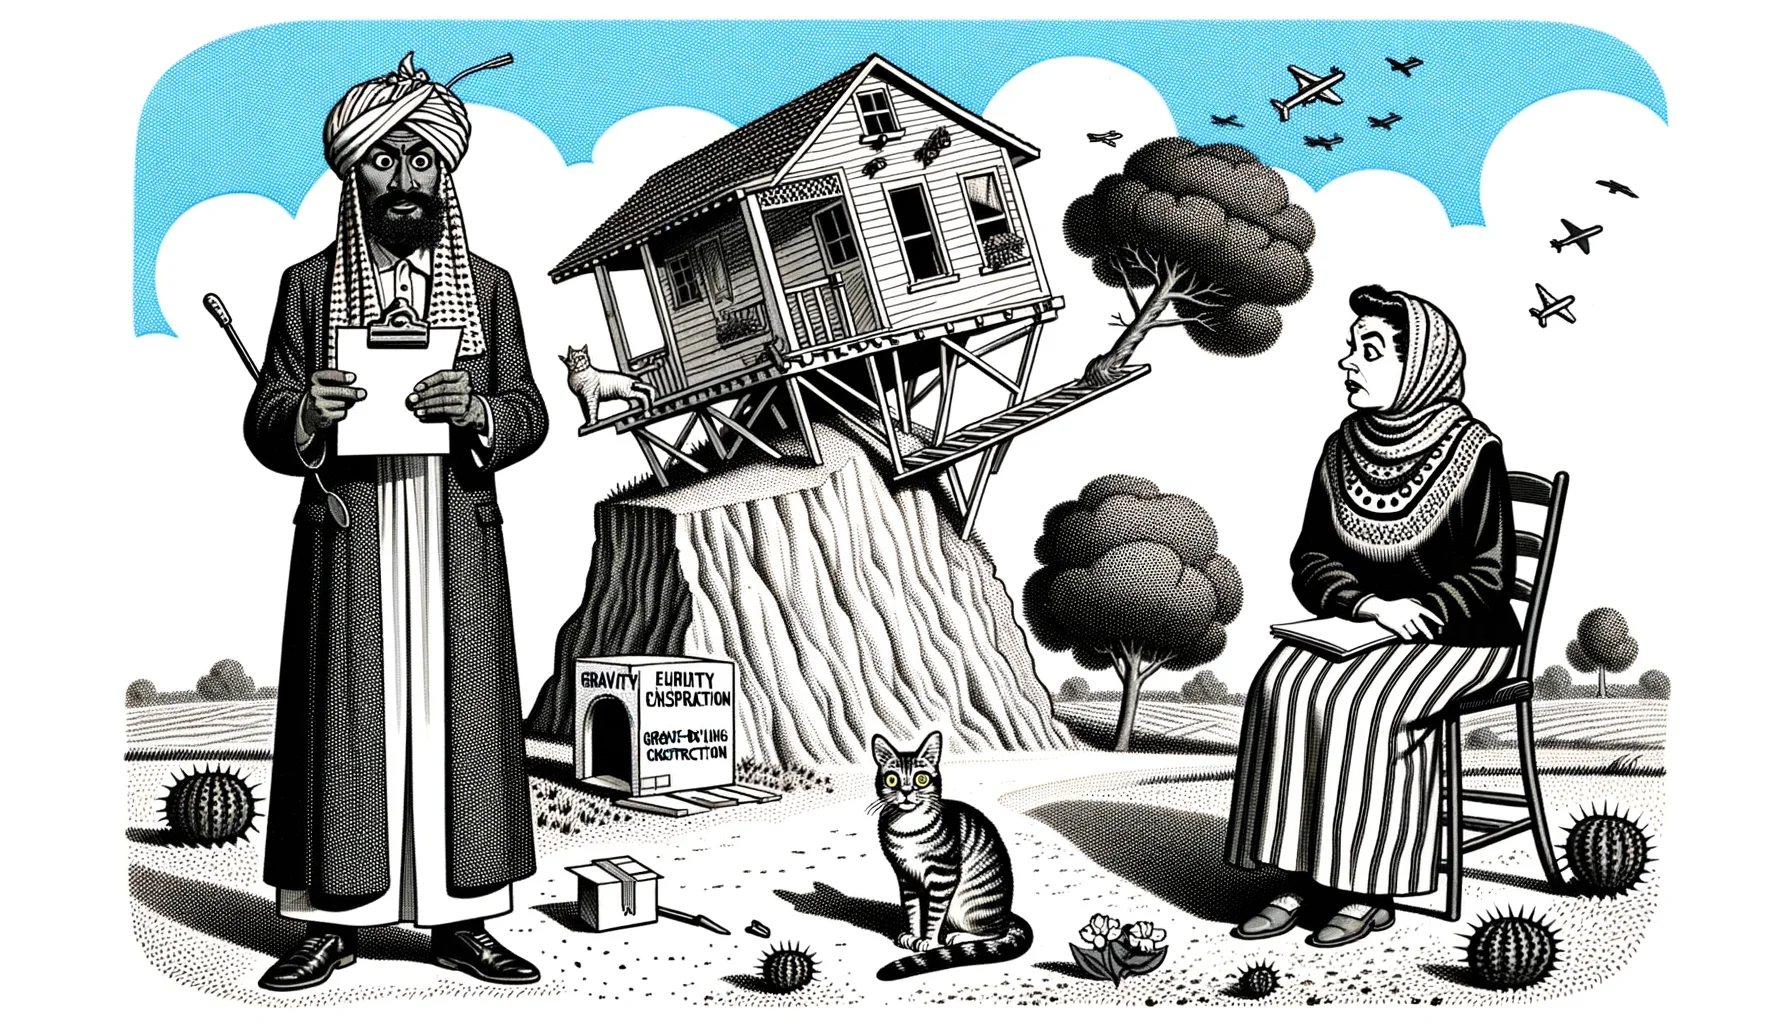 Create a comic-style representation of a humorous home inspection event. Picture this; a Middle-Eastern male inspector is checking the structure of a crooked house built on a hill, with a cat chilling on the inclined roof. Meanwhile, a Latino woman homeowner looks on with an anxious expression, holding a checklist with items such as 'Gravity-defying Construction'. Nearby, a tree grows horizontally instead of upright, to adapt to the steep hill. A mouse, formerly the house inhabitant, looks on from a hole with a raised eyebrow and a moving box beside it.